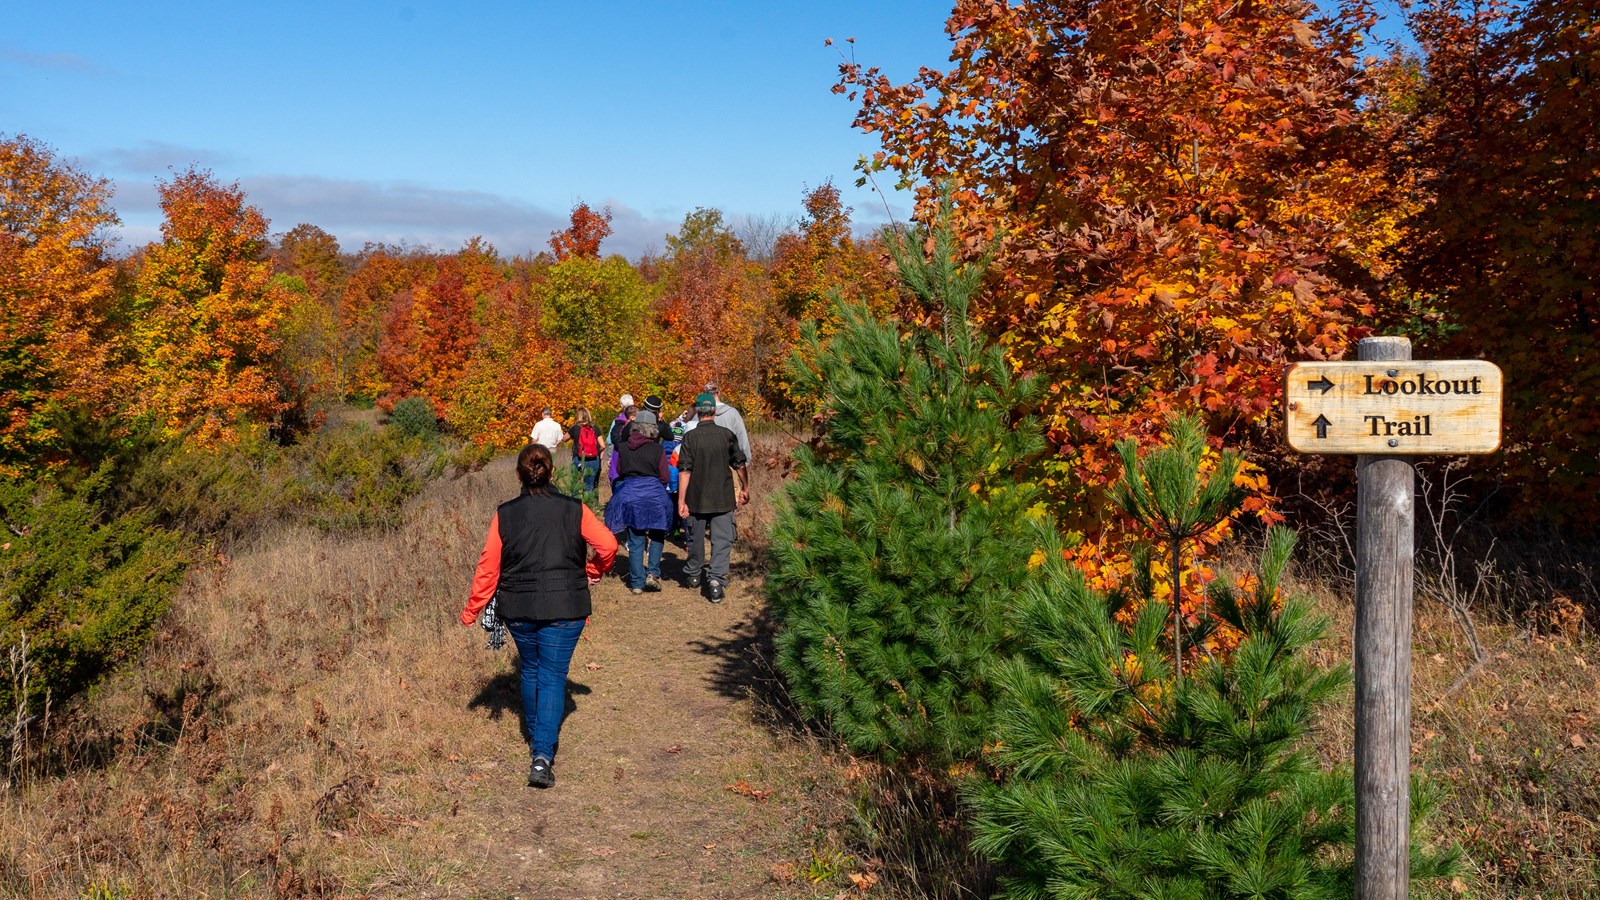 A group of people hike on a sandy trail surrounded by trees in fall foliage